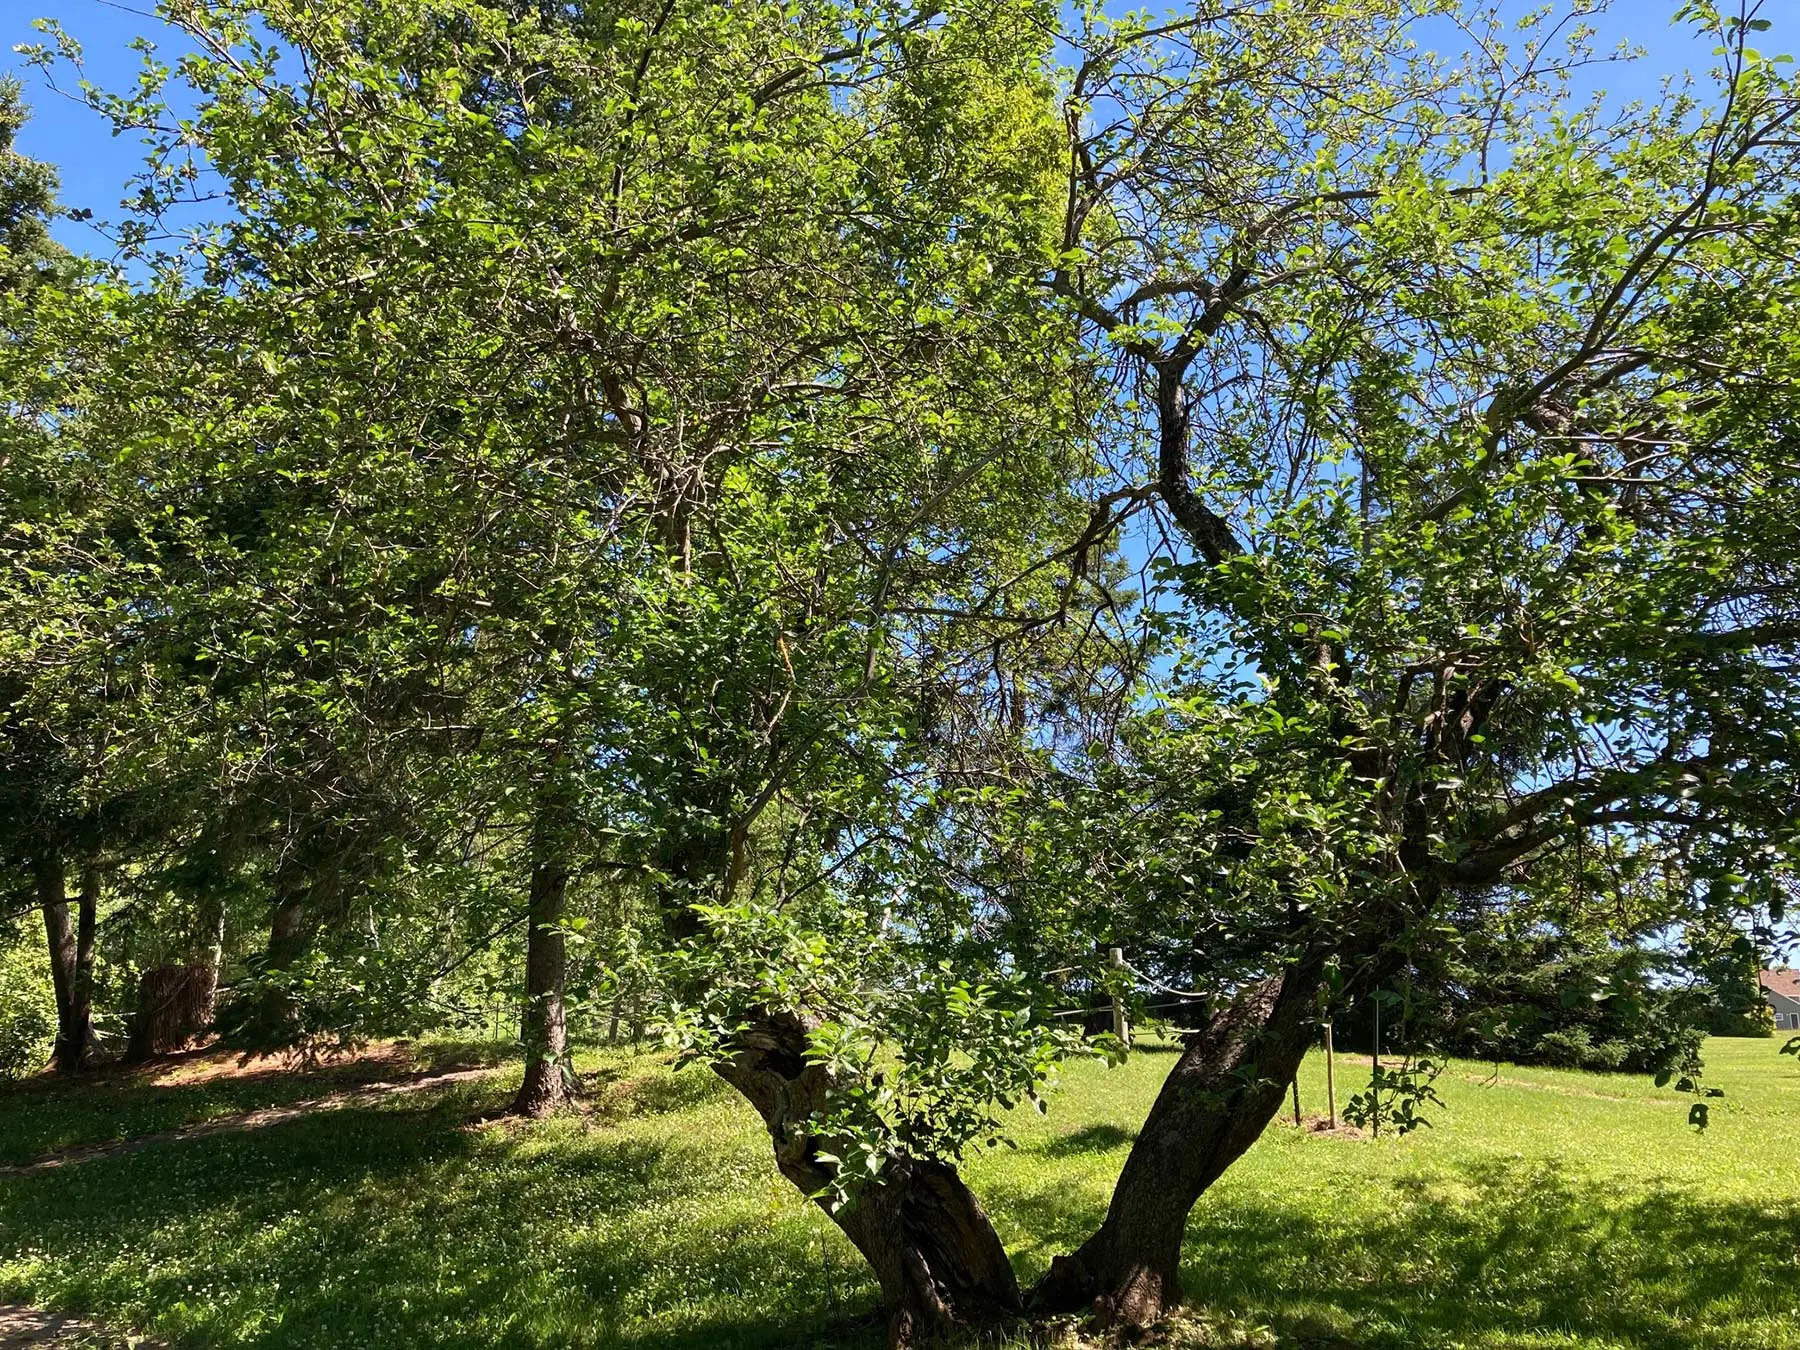 photo of a two-trunked apple tree, leafed out in in green and surrounded by grass, a rope fence in the background guards the edge of a stone foundation.